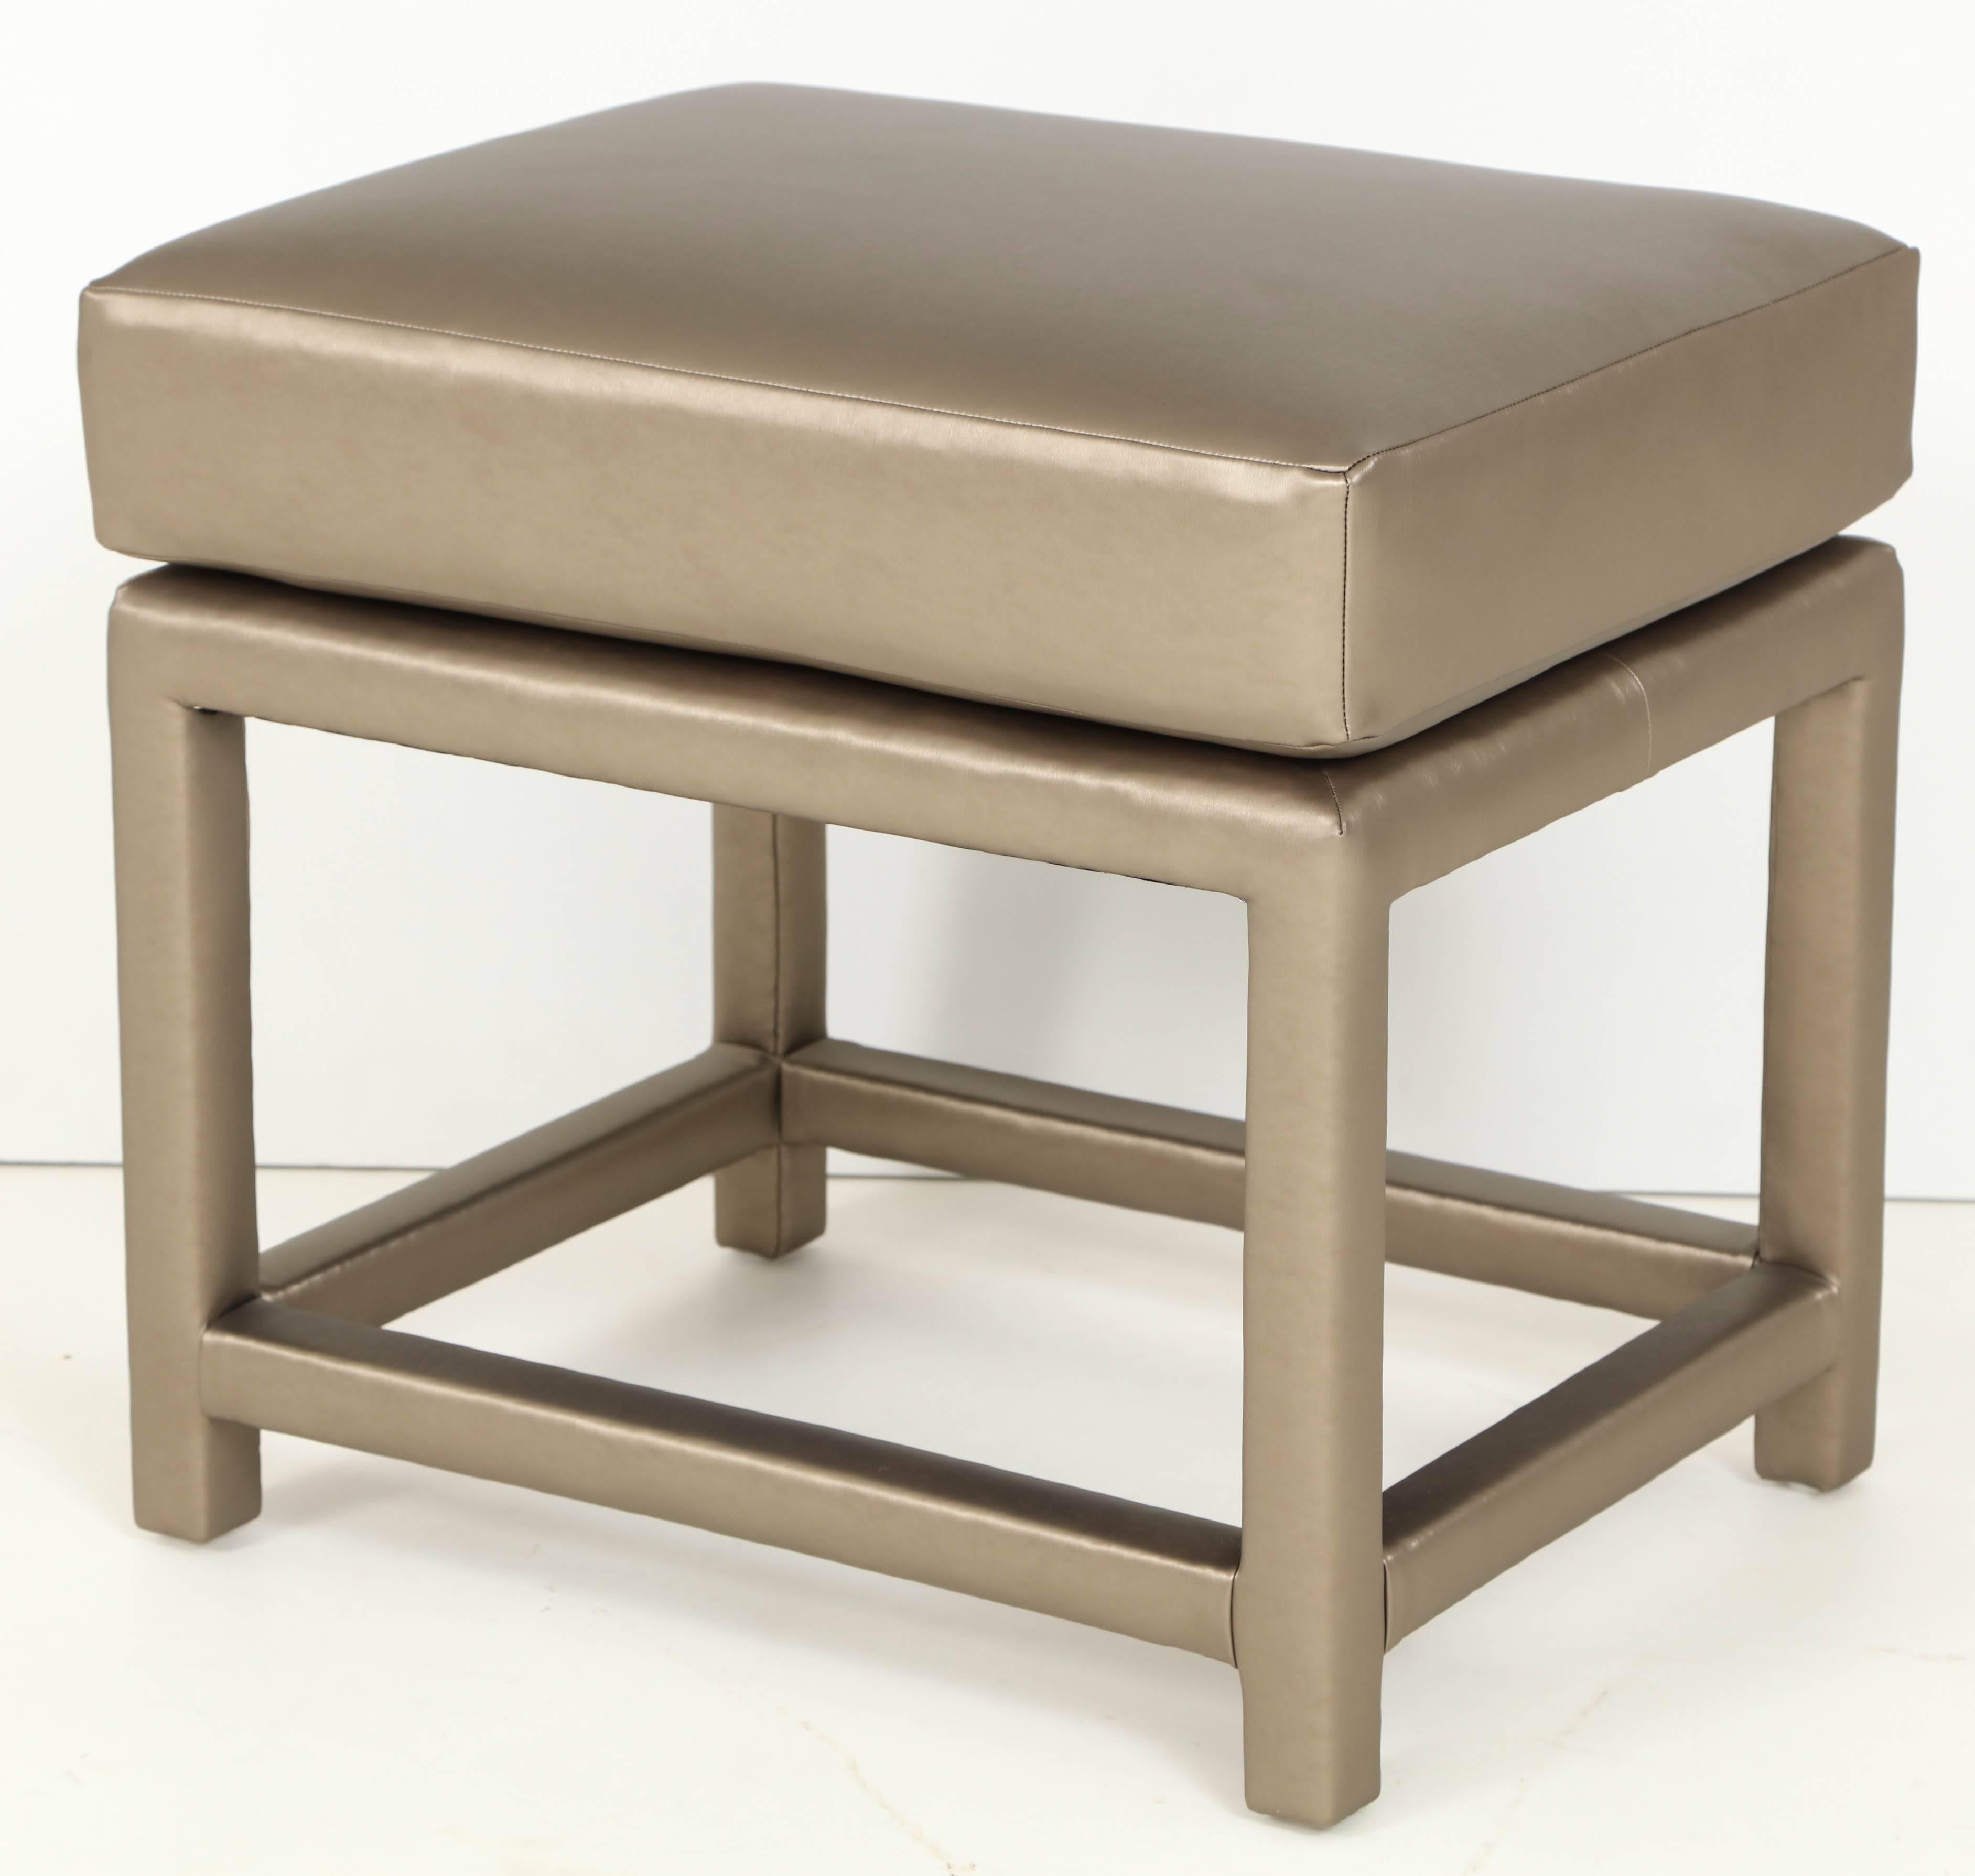 Pair of bronze metallic upholstered ottomans designed by Milo Baughman. Ottomans feature new bronze upholstered frames with attached cushions.